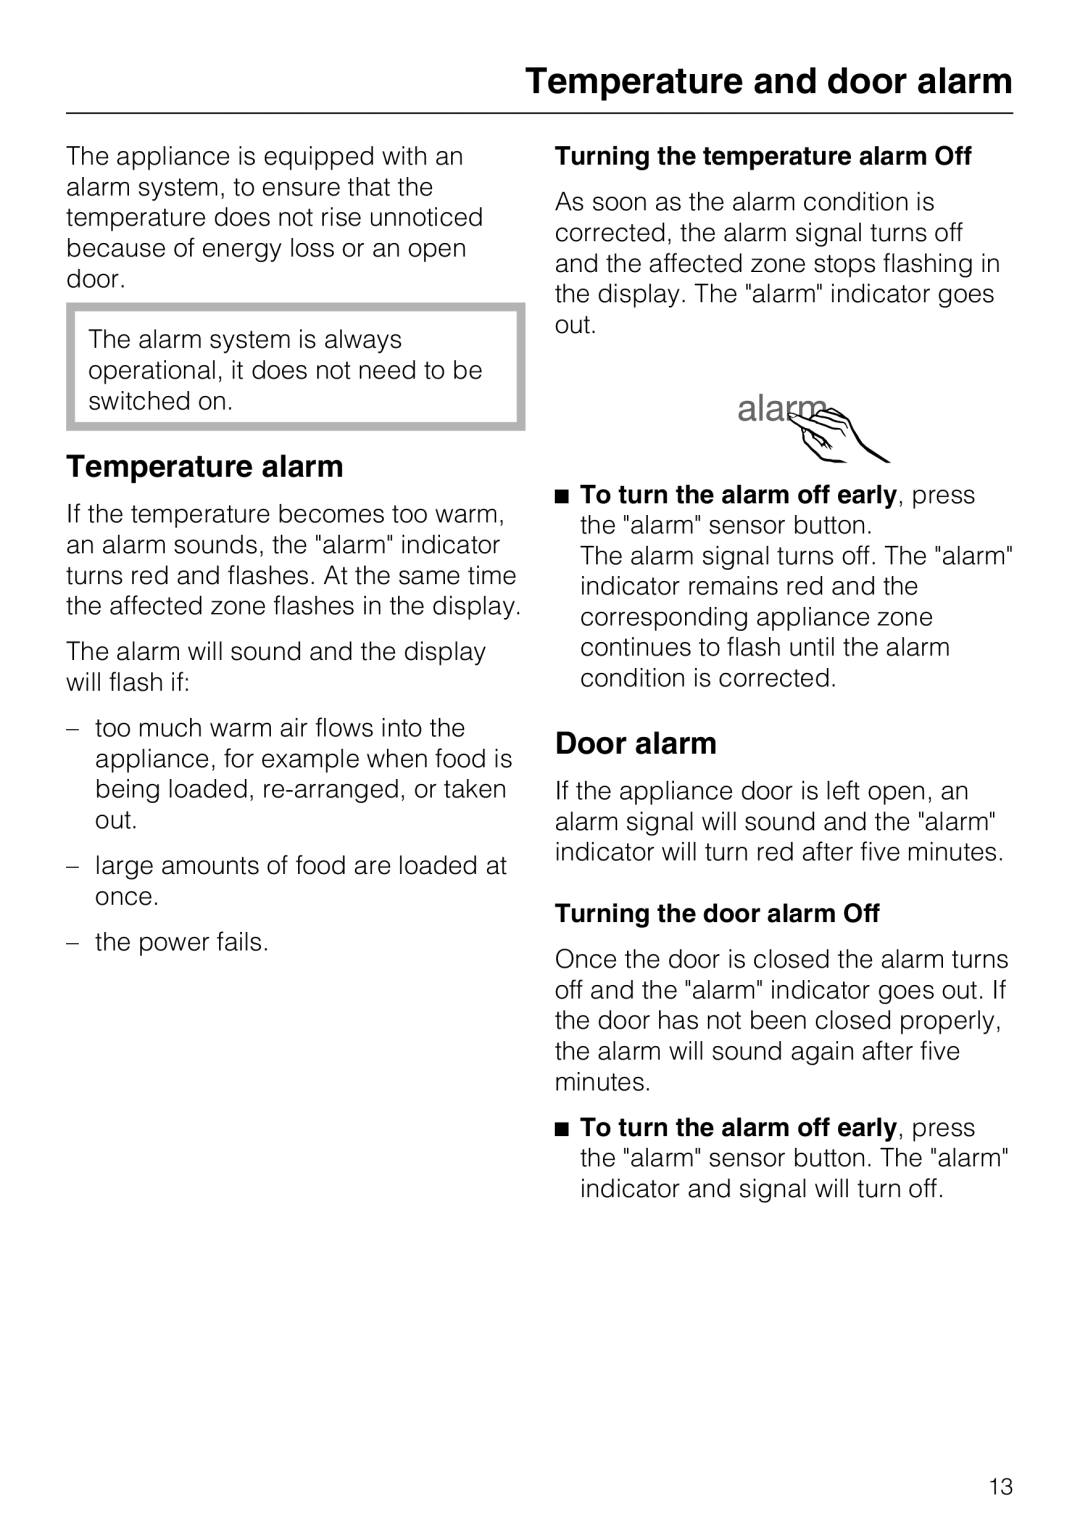 Miele 09 920 570 installation instructions Temperature and door alarm, Temperature alarm, Door alarm 